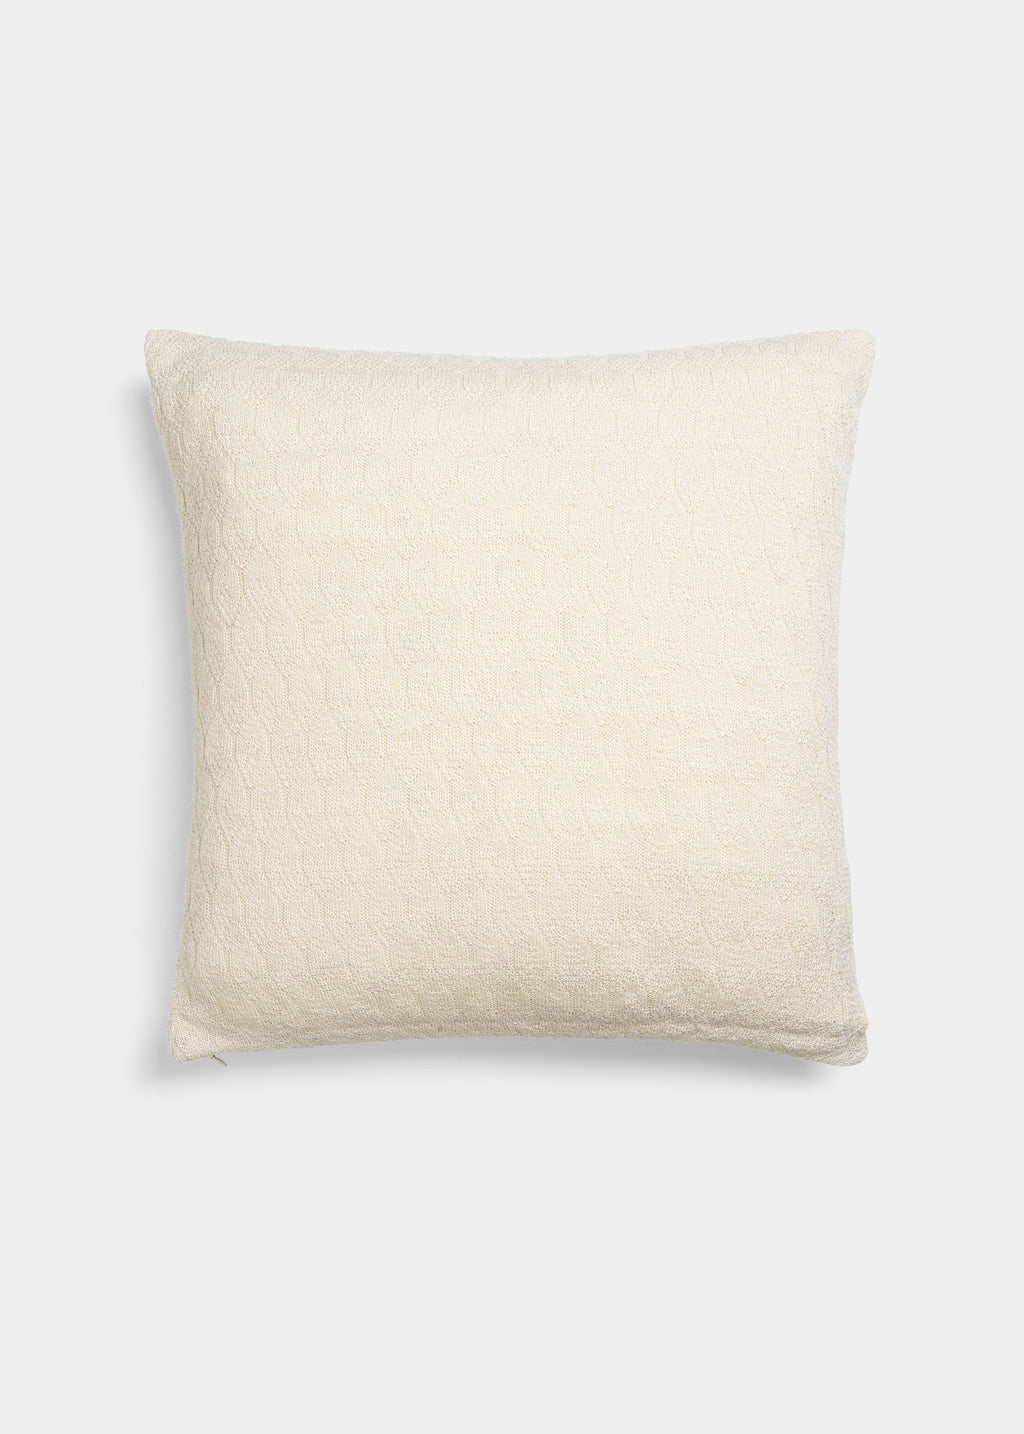 Raul Classic Pillow 50 x 50 / Albicant